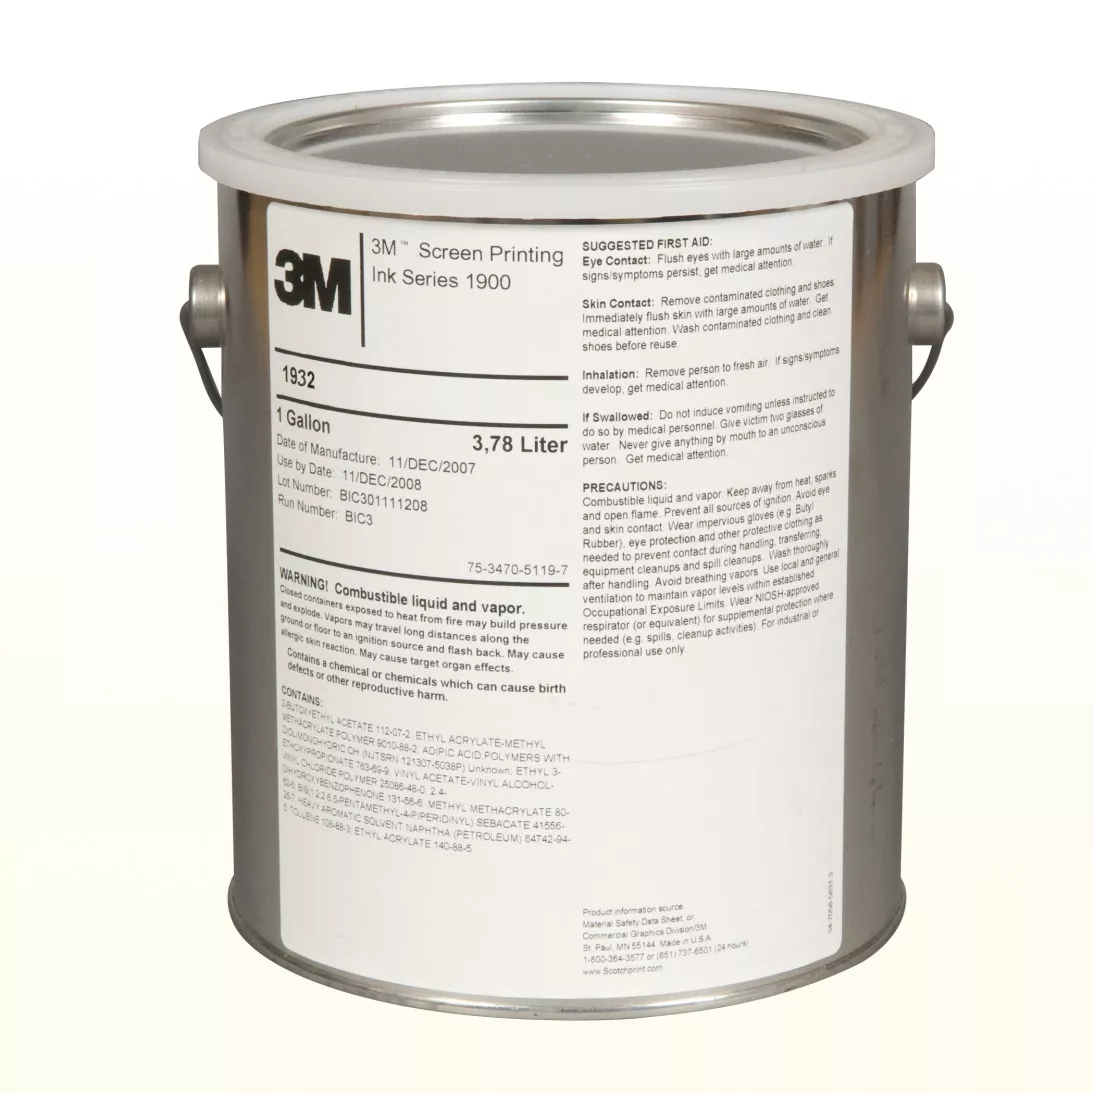 3M™ Screen Printing Ink 1932, Lemon Yellow, 1 Gallon Container